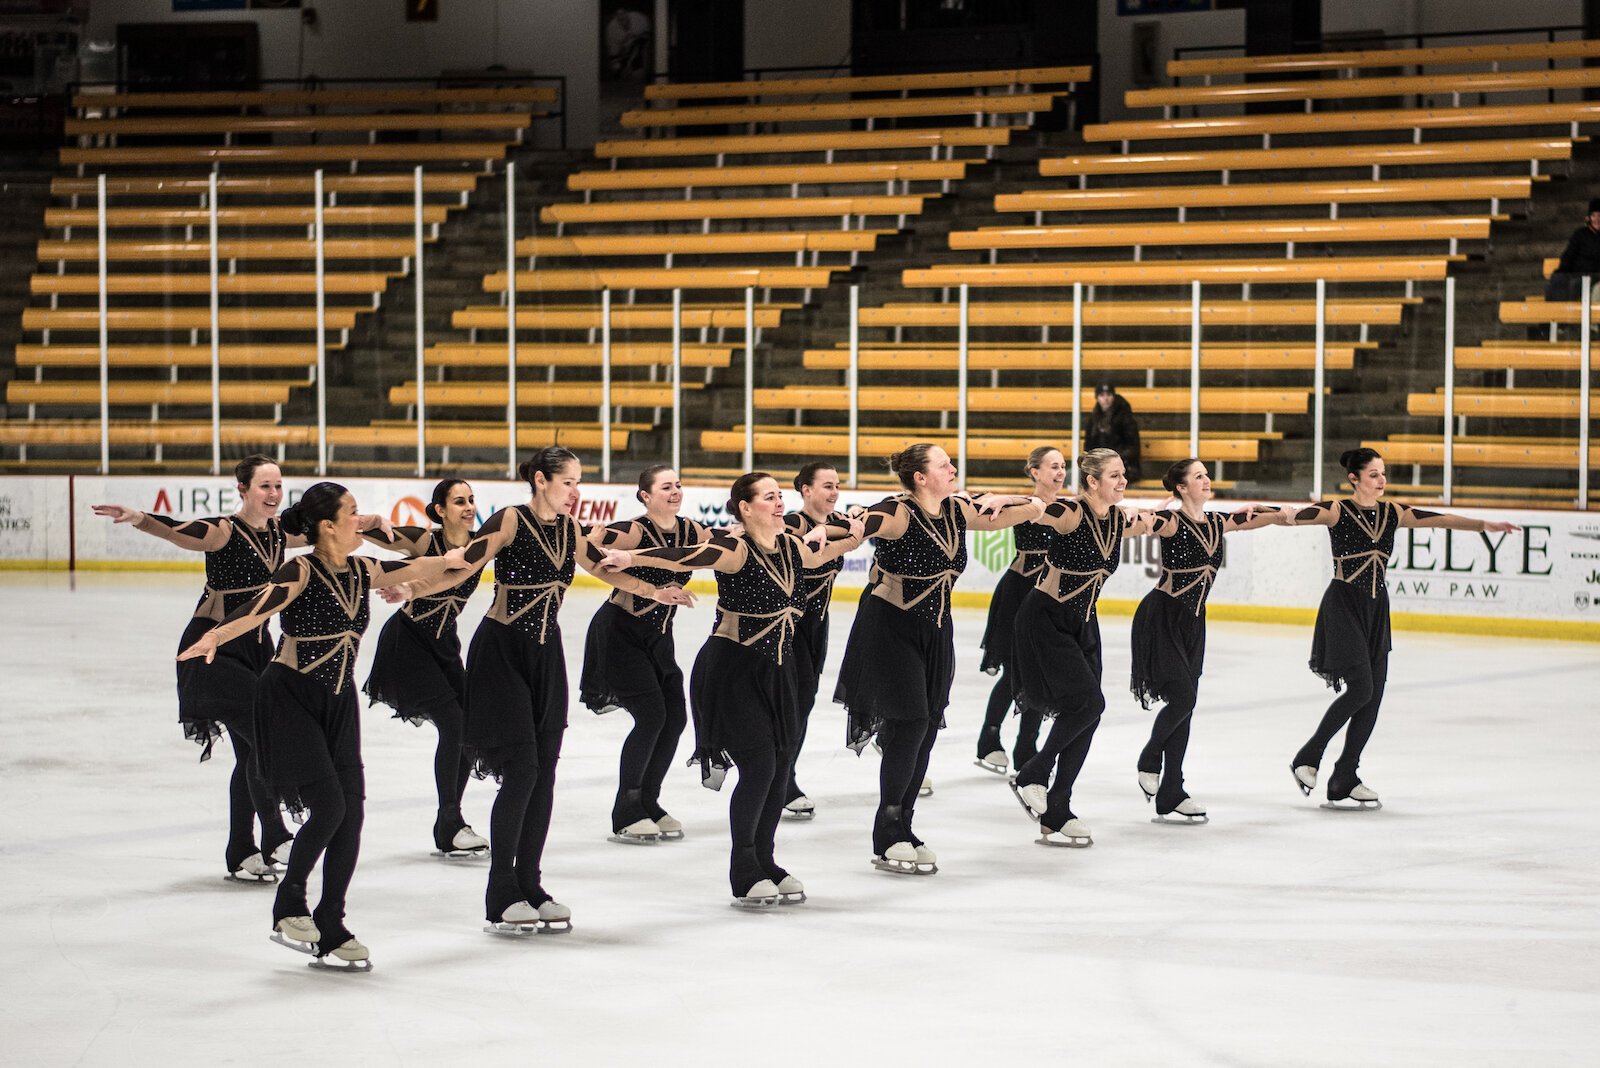 The Kalamazoo Kinetics placed 10th at the 2023 U.S. Synchronized Skating Competition in March